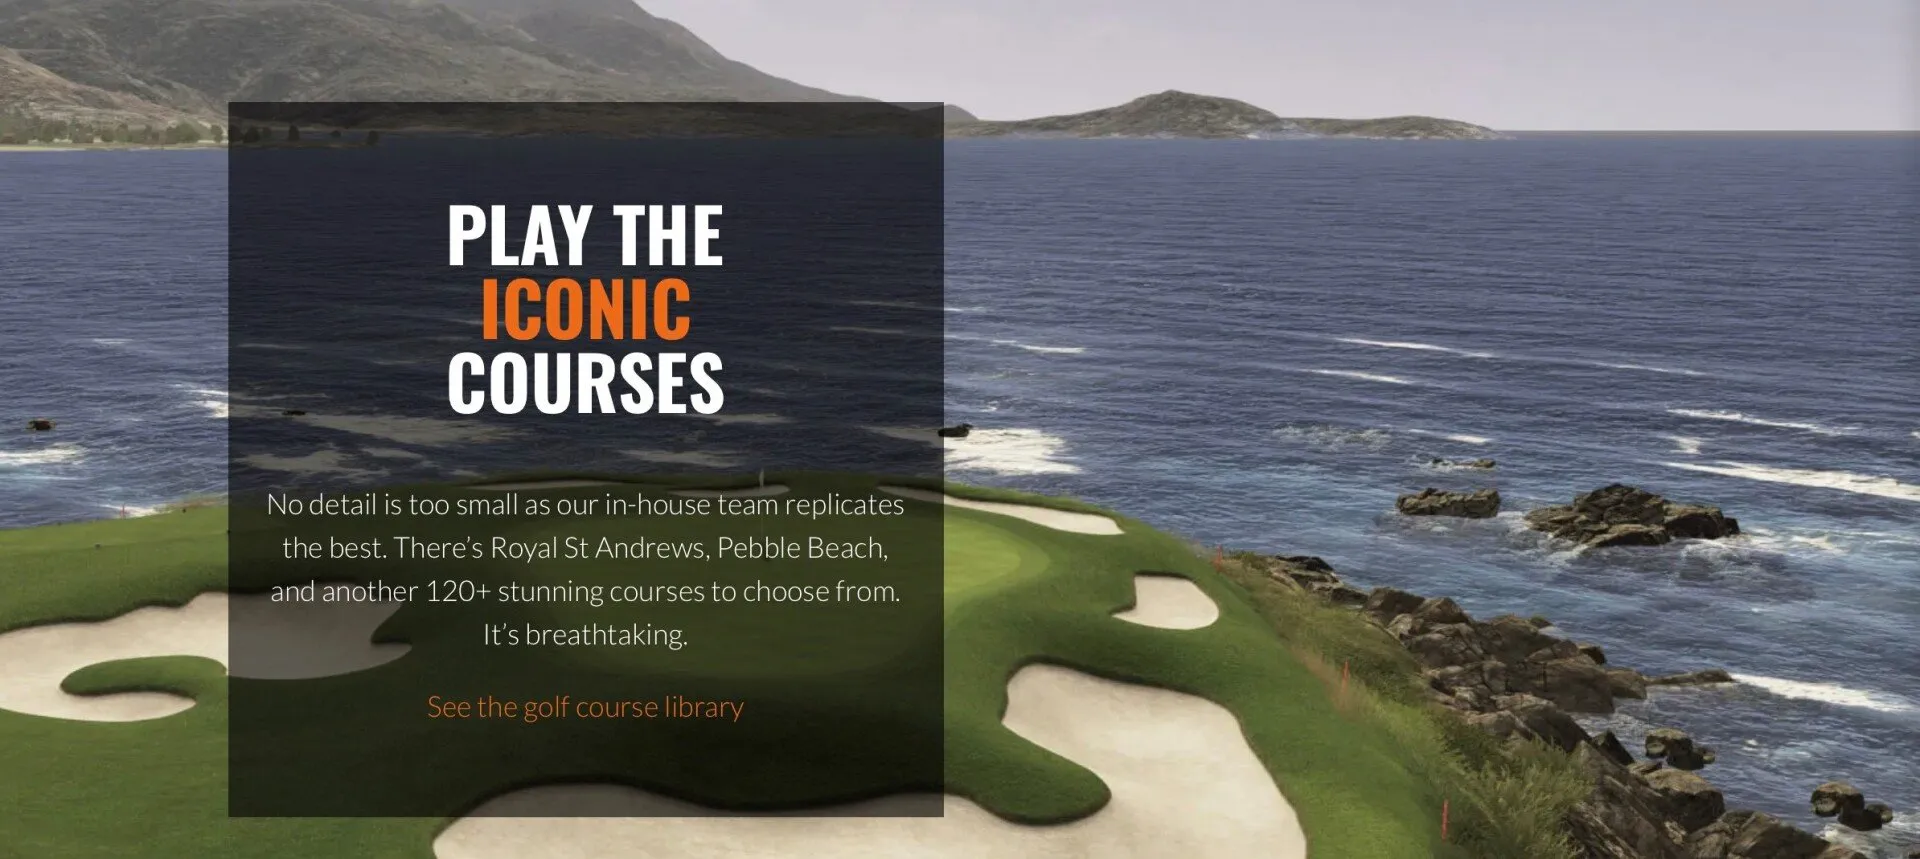 Play the iconic courses